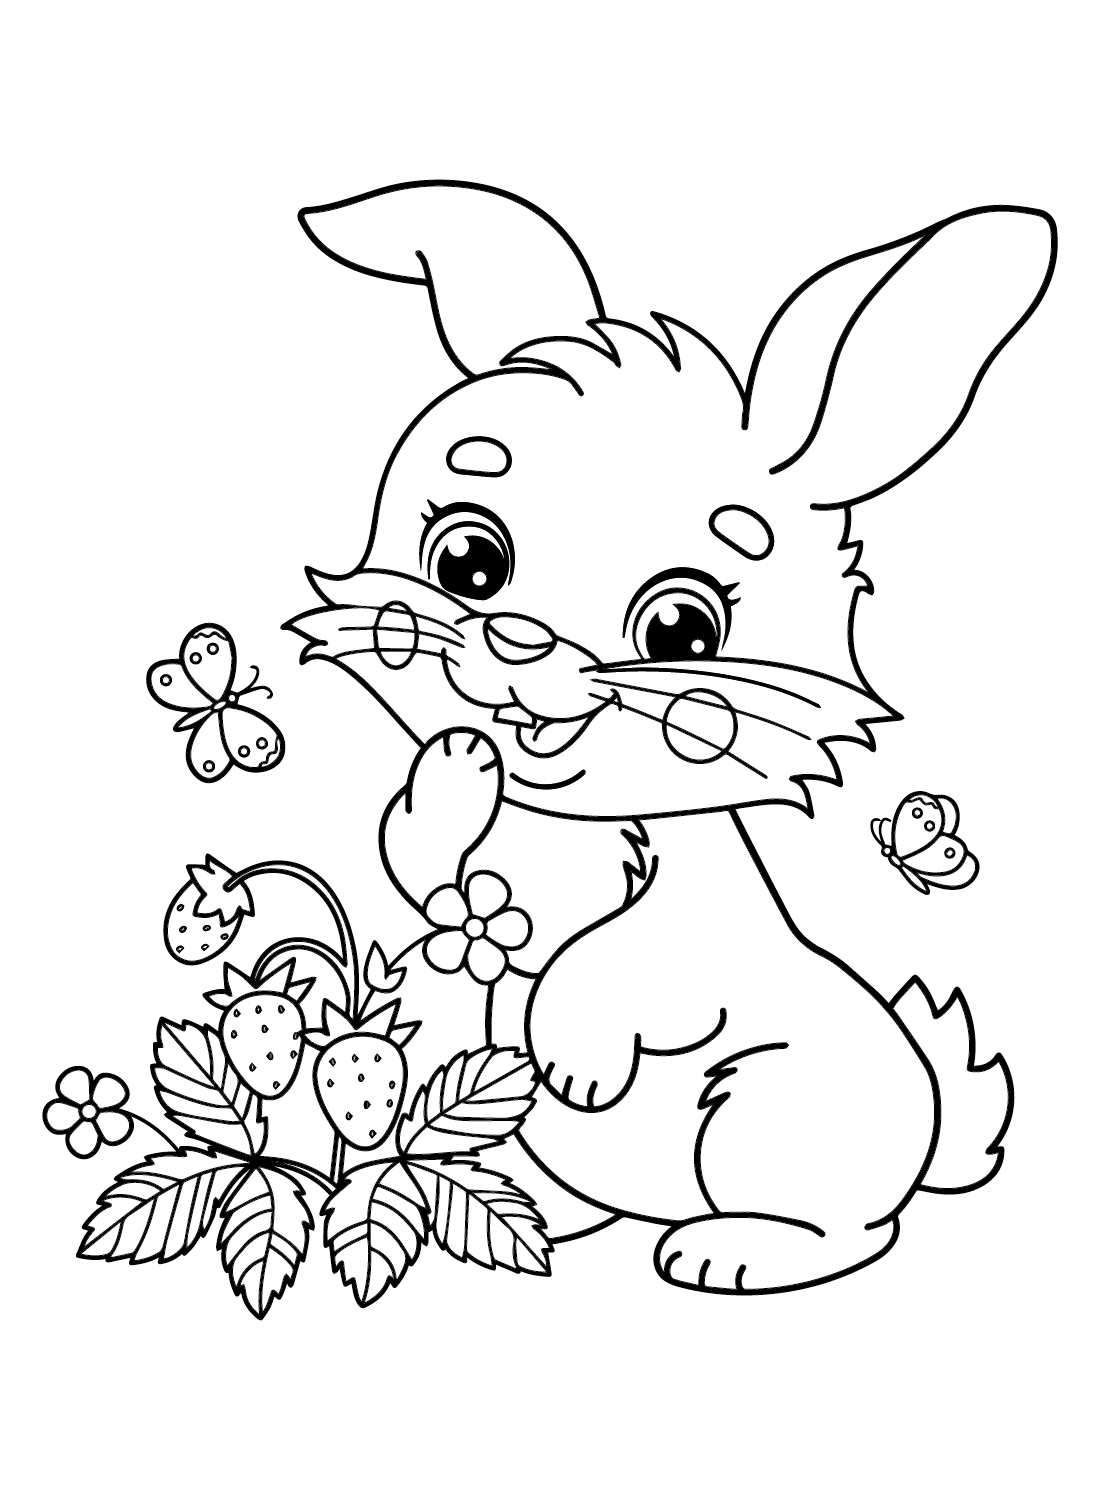 Rabbit And Strawberry Coloring Page Free Printable Coloring Pages